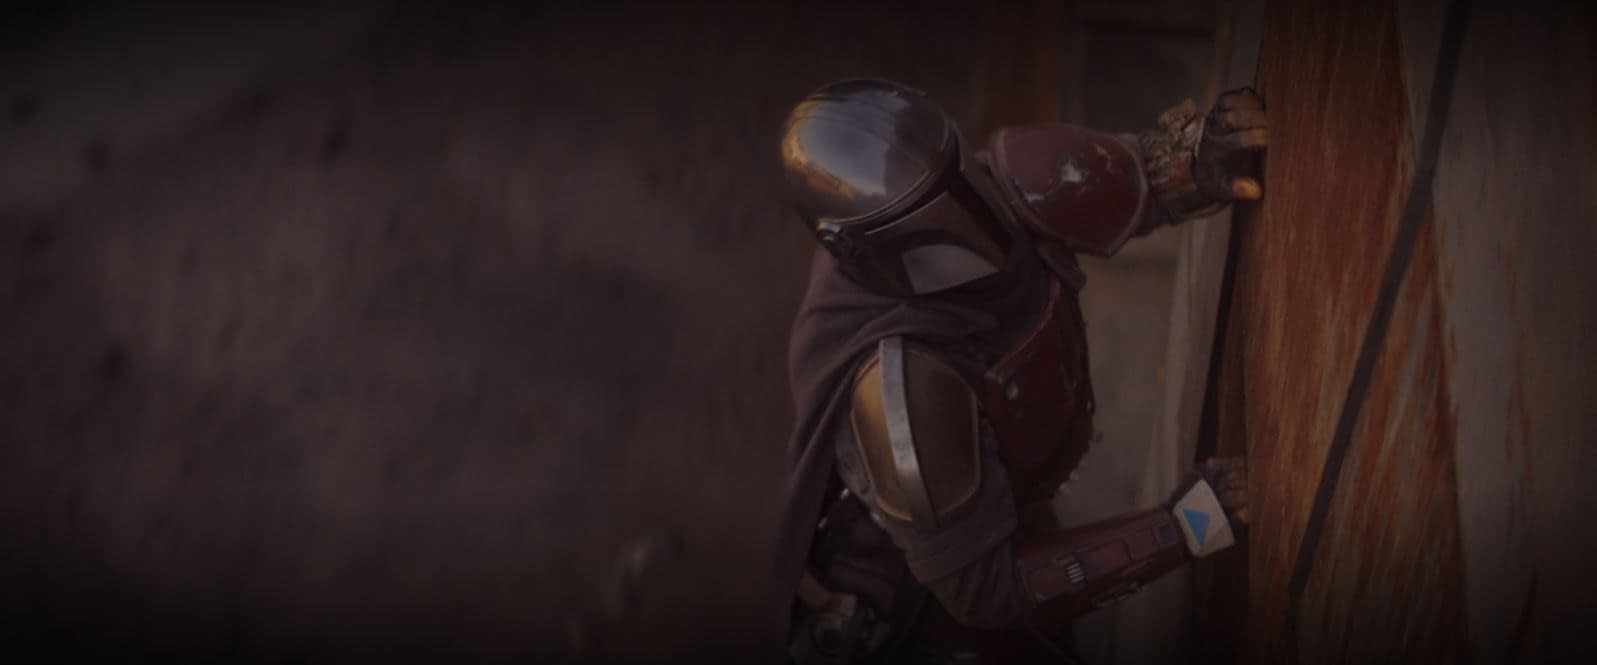 "The Mandalorian" S01, Ep02: "The Child" Brings Out Your Inner Jawa (Spoiler Review)